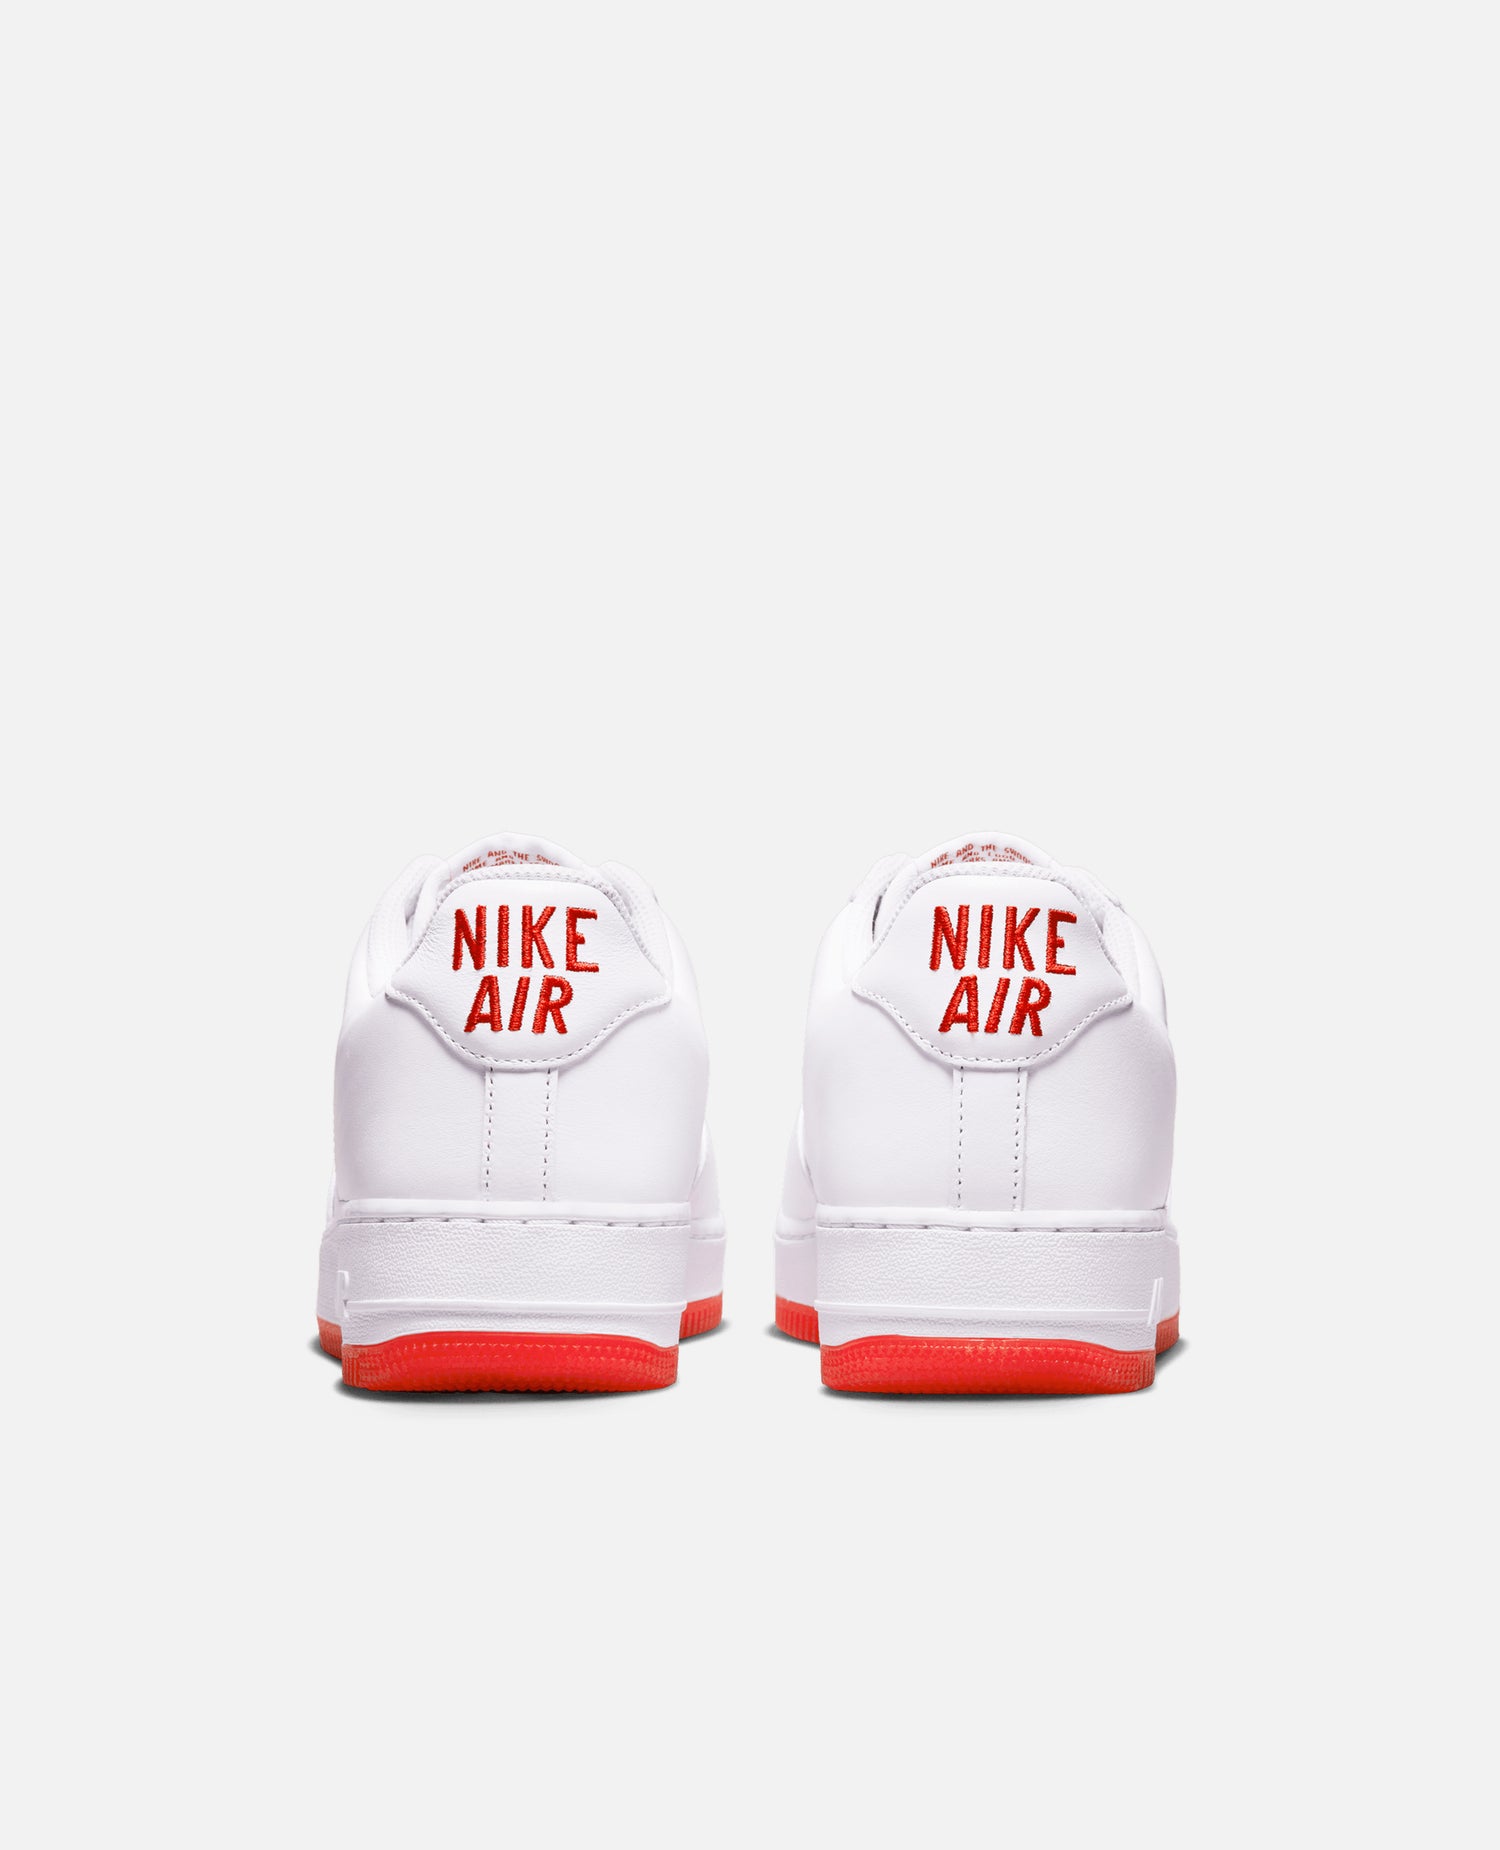 Nike Air Force 1 Low Retro (White/University Red)